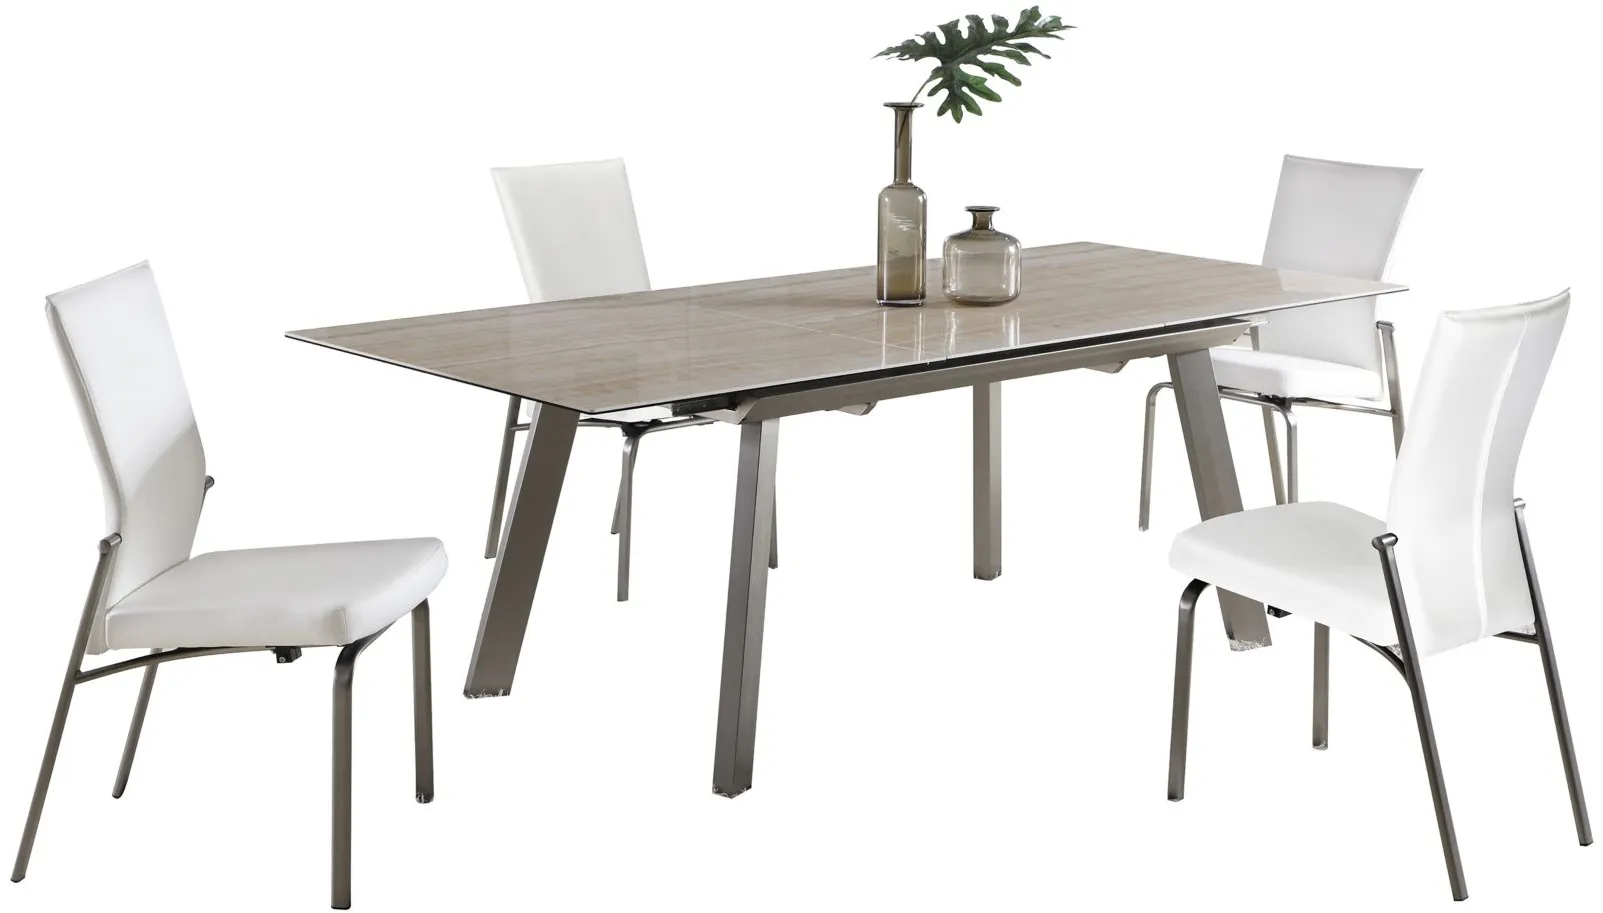 Eleanoir 5-pc. Dining Set in Beige and White by Chintaly Imports